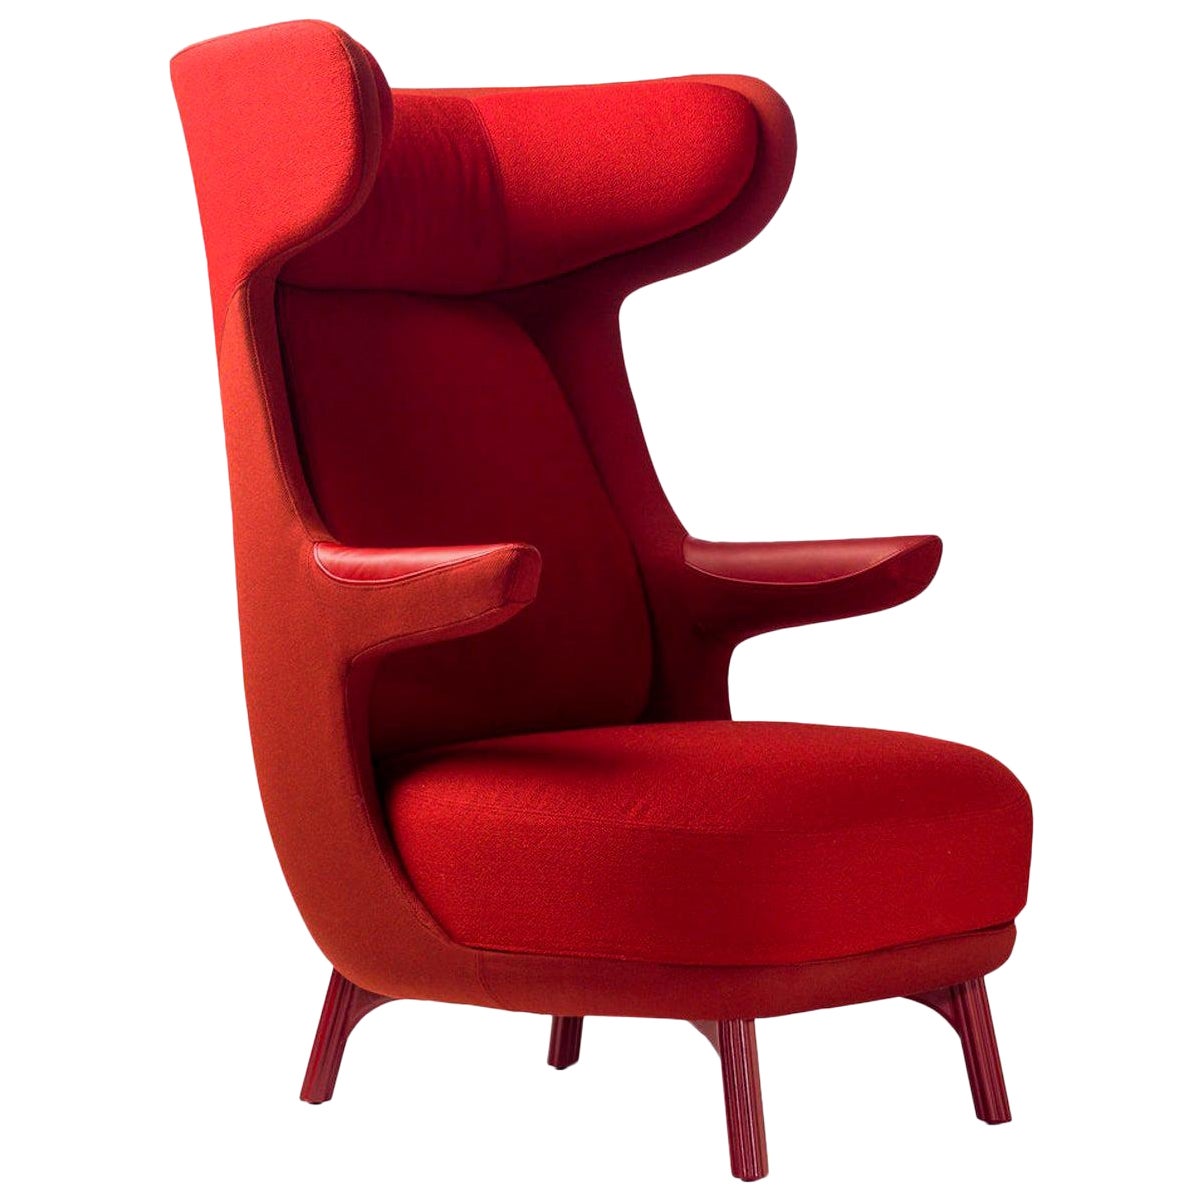 Jaime Hayon, Monocolor Red Fabric Lederpolsterung Dino Sessel 